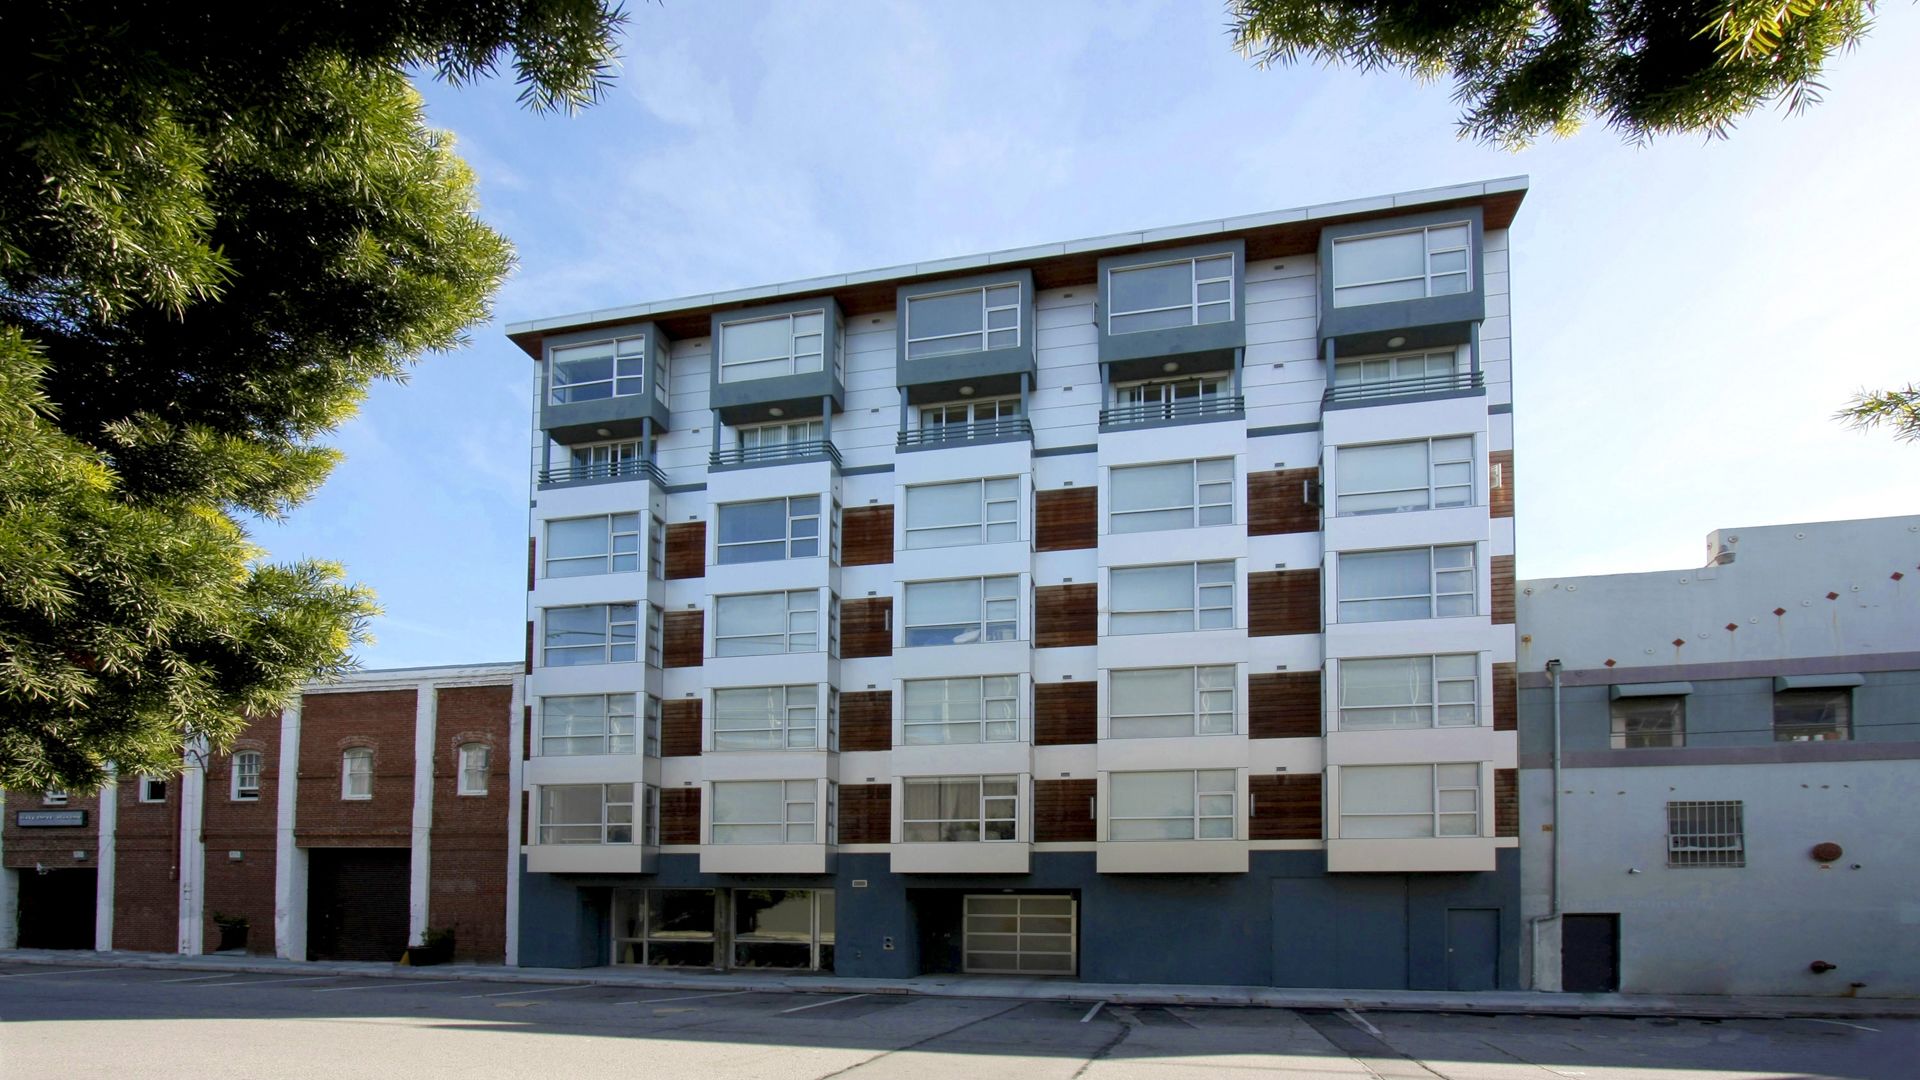 77 Bluxome Apartments - SoMa - 77 Bluxome Street | EquityApartments.com